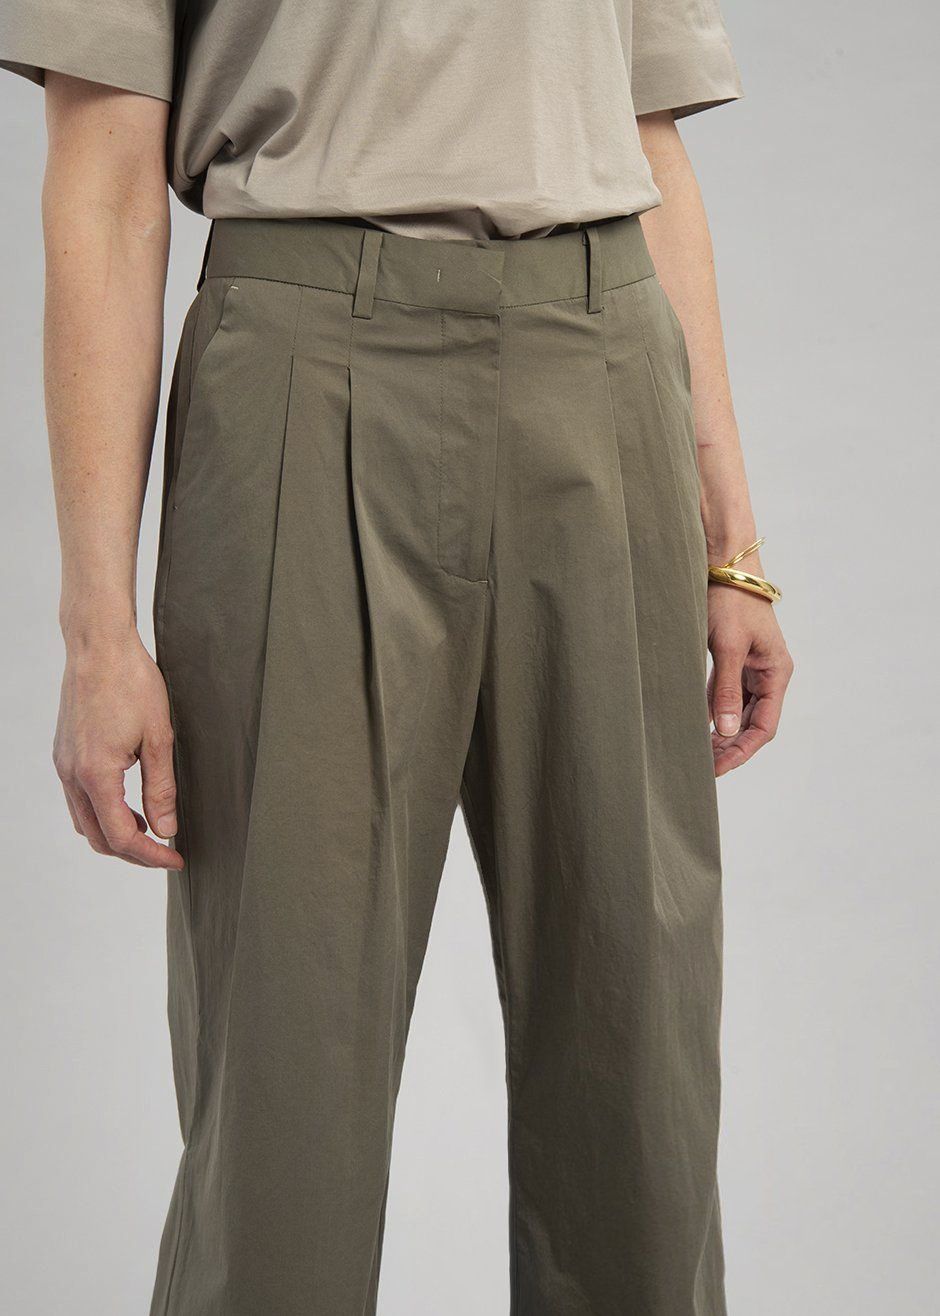 Blanche Pleated Trousers - Olive - 4